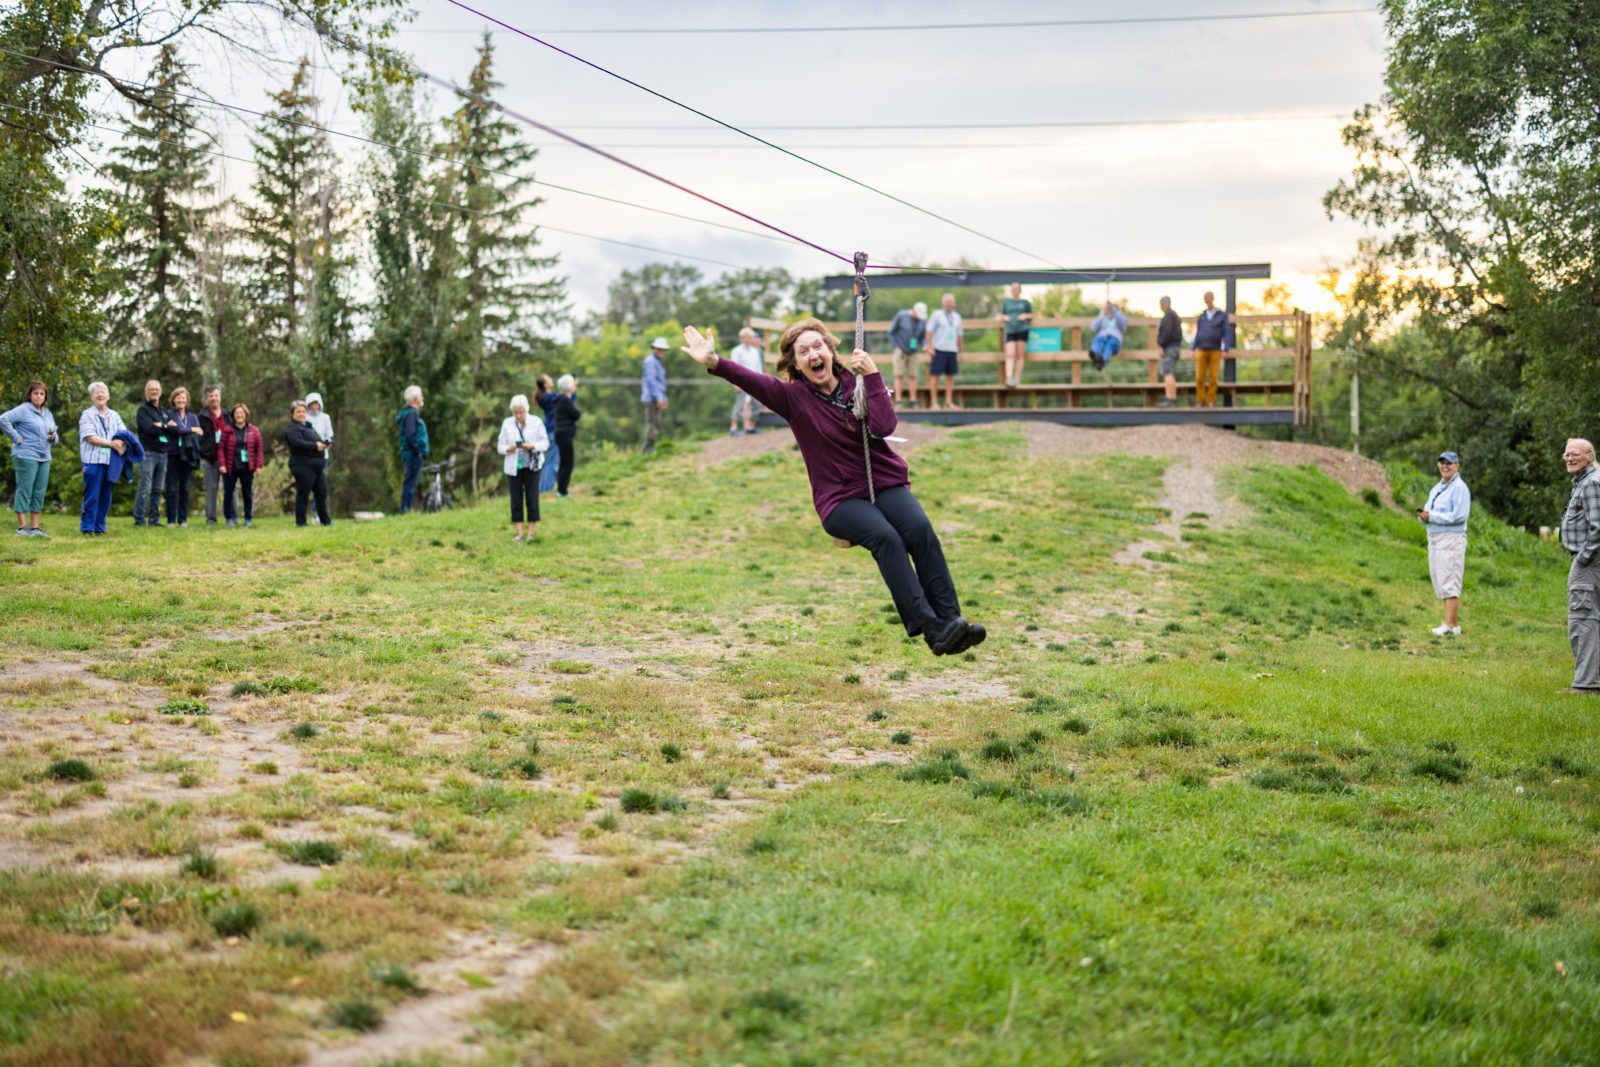 A women smiles at the camera while riding the zipline